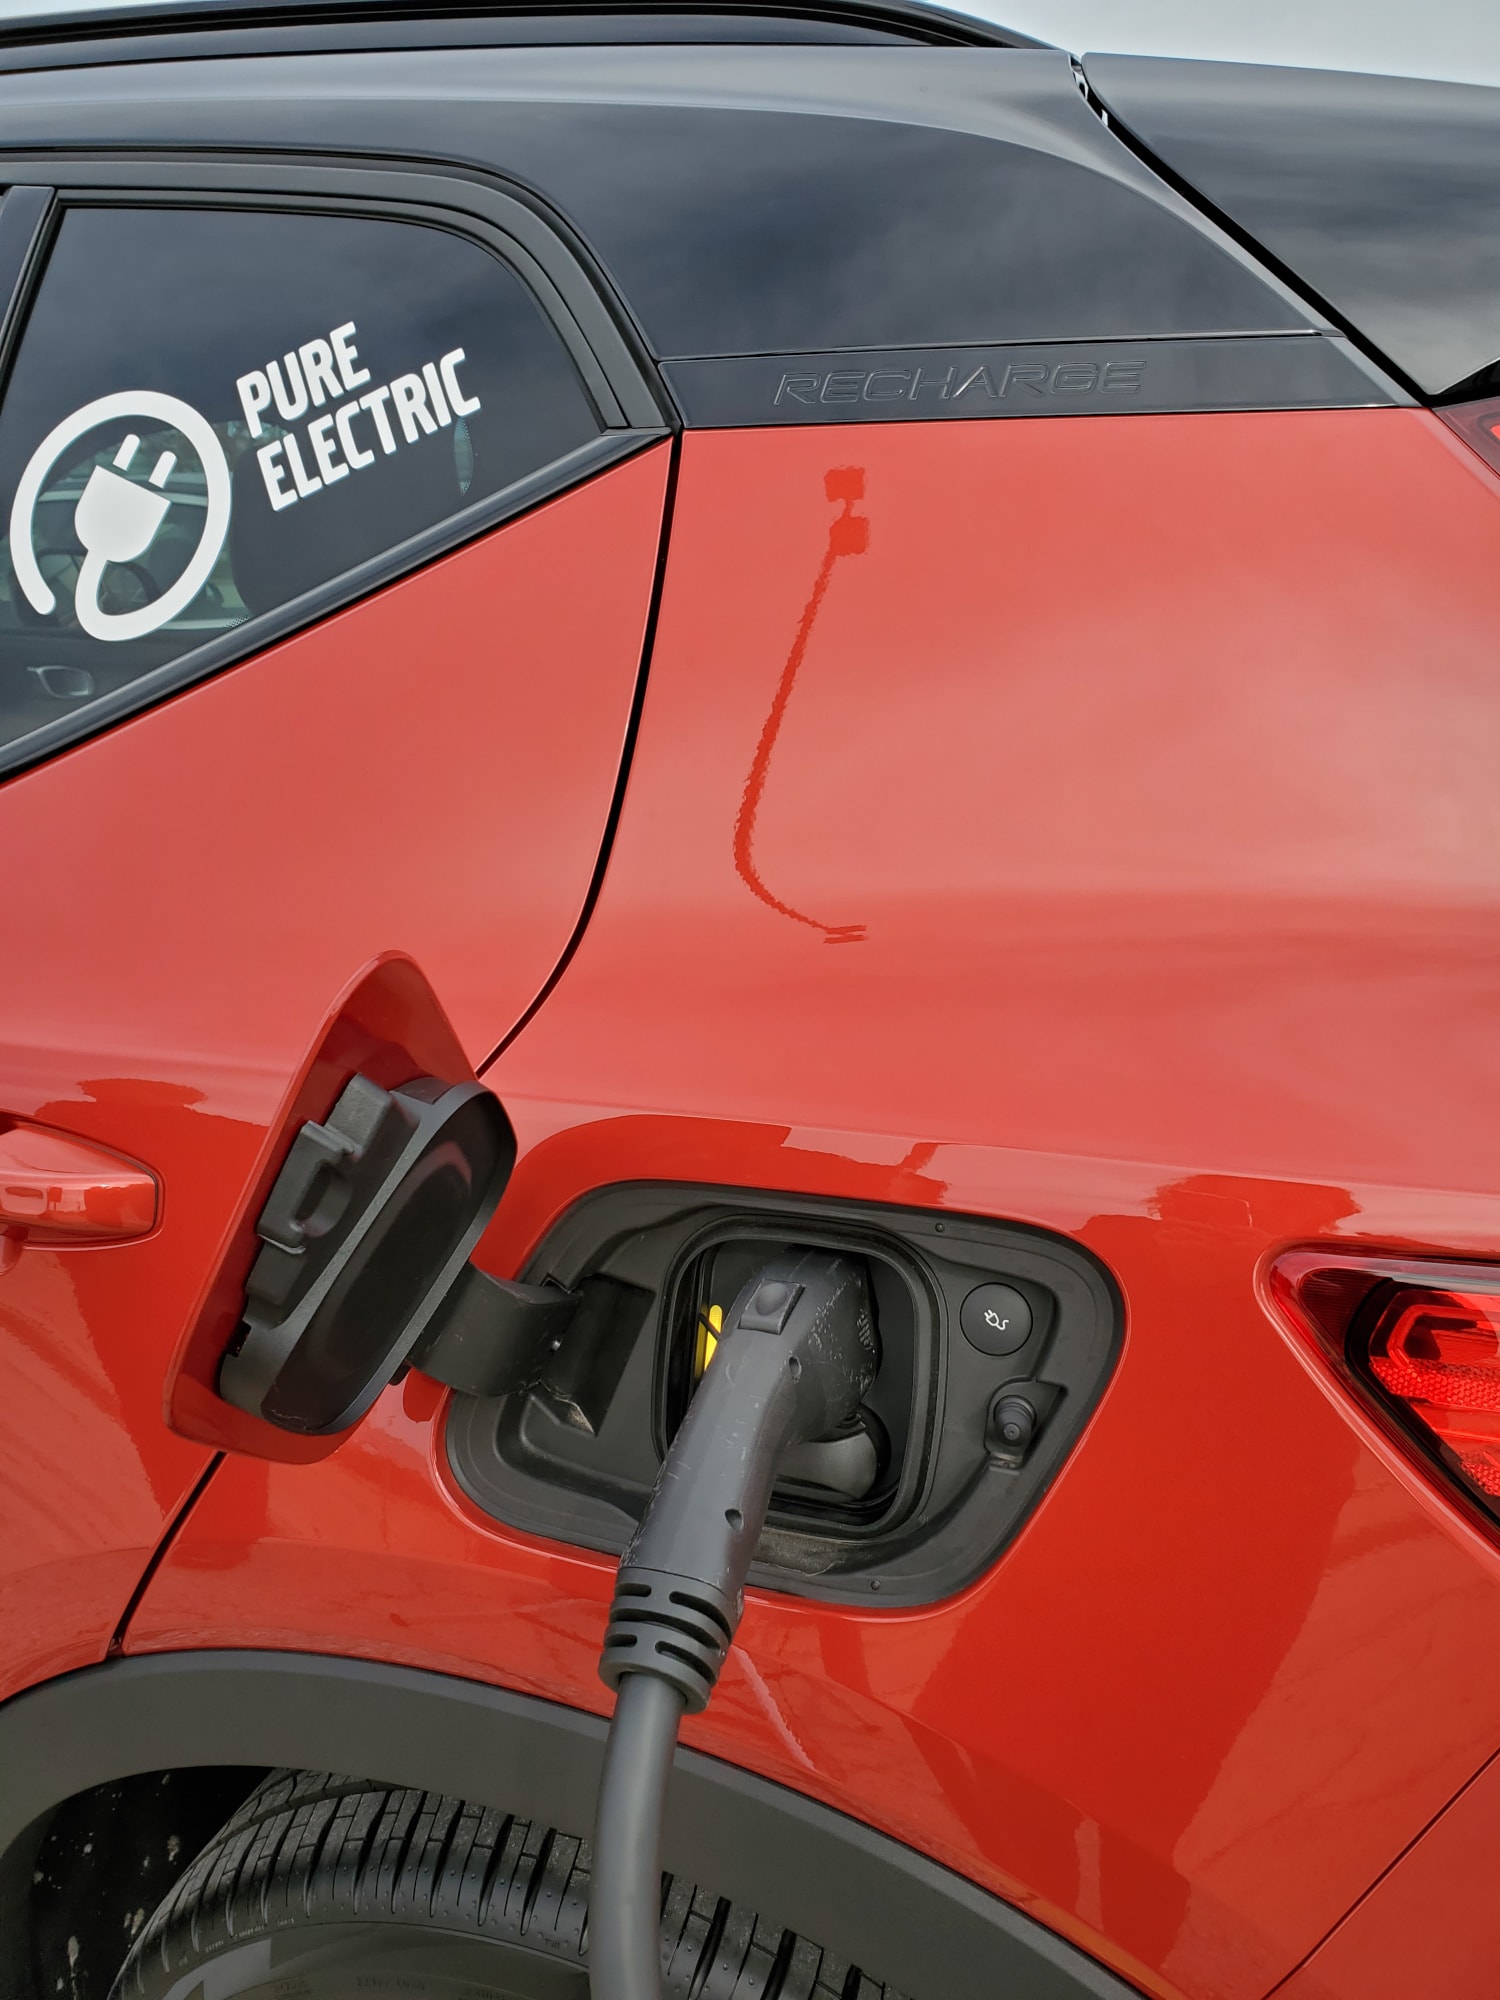 The Need for Rapid Deployment of EV Infrastructure